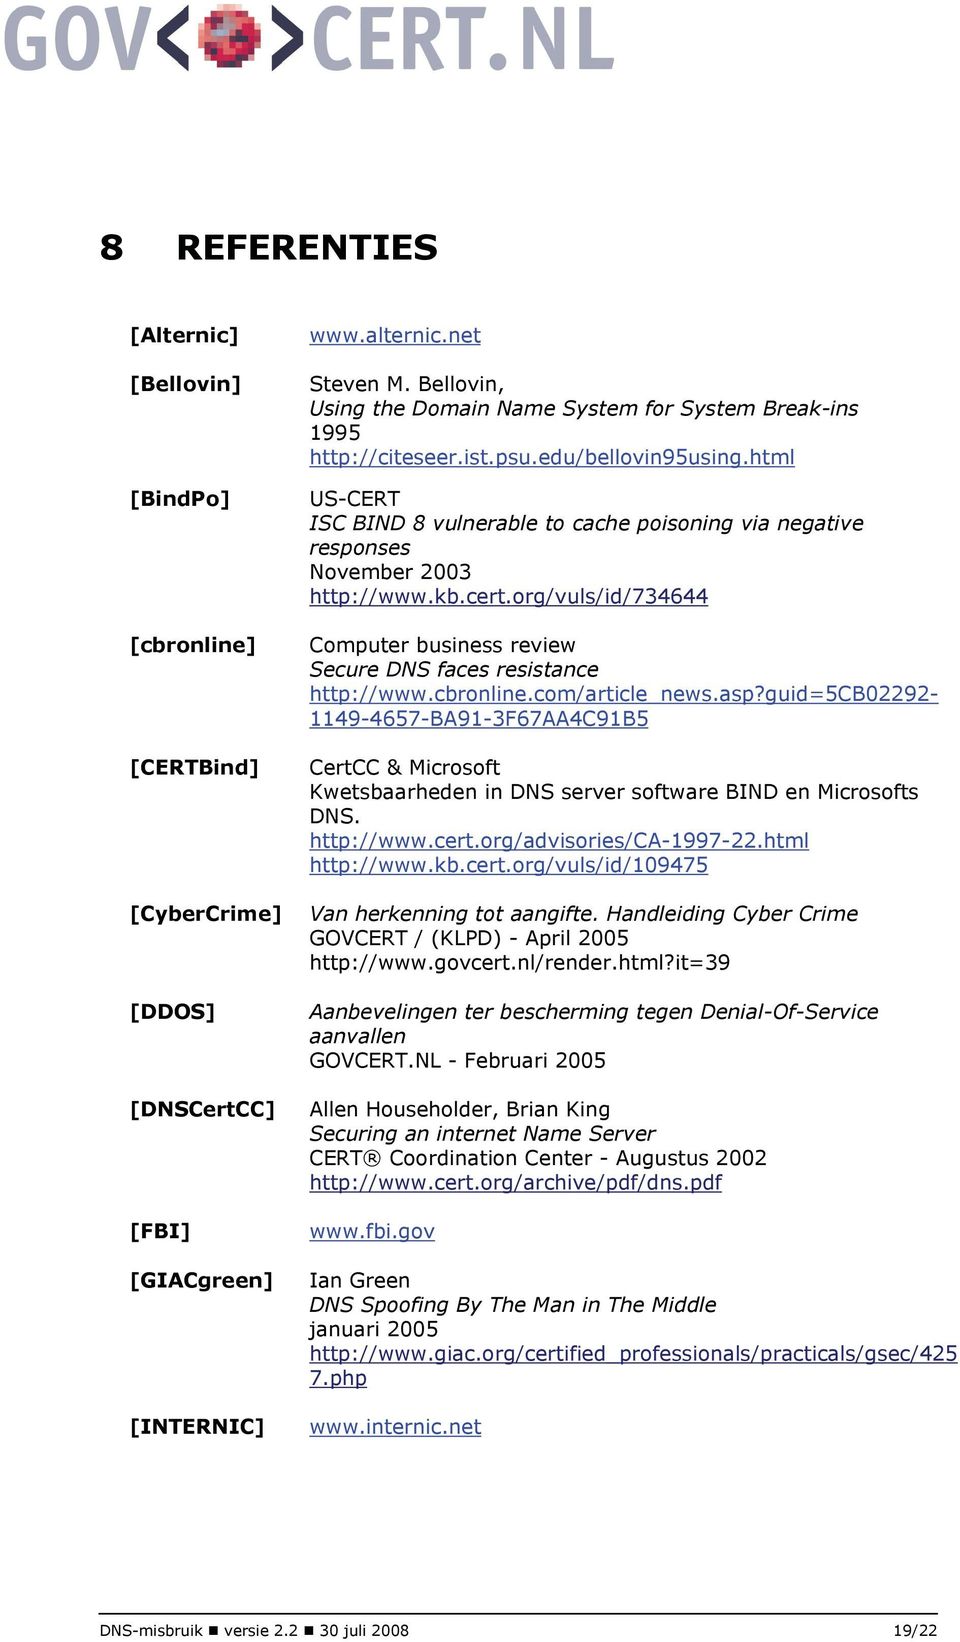 html US-CERT ISC BIND 8 vulnerable to cache poisoning via negative responses November 2003 http://www.kb.cert.org/vuls/id/734644 Computer business review Secure DNS faces resistance http://www.